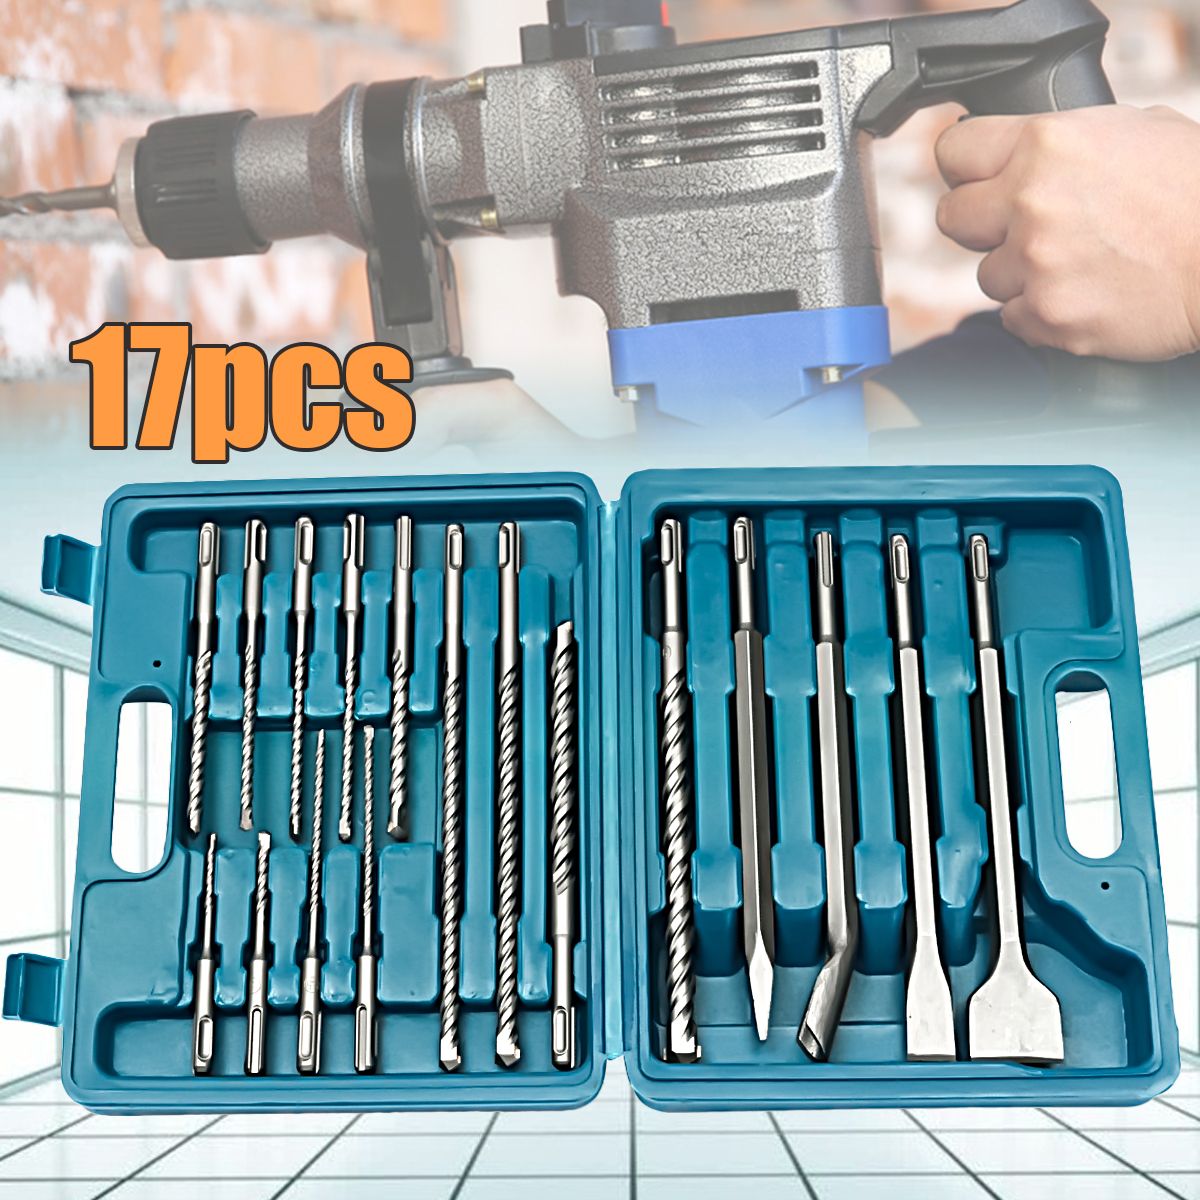 17-in-1-Drill-Bits-Chisel-SDS-Plus-Rotary-Hammer-Bits-Set-For-Bosch-Hilti-Plus-1359069